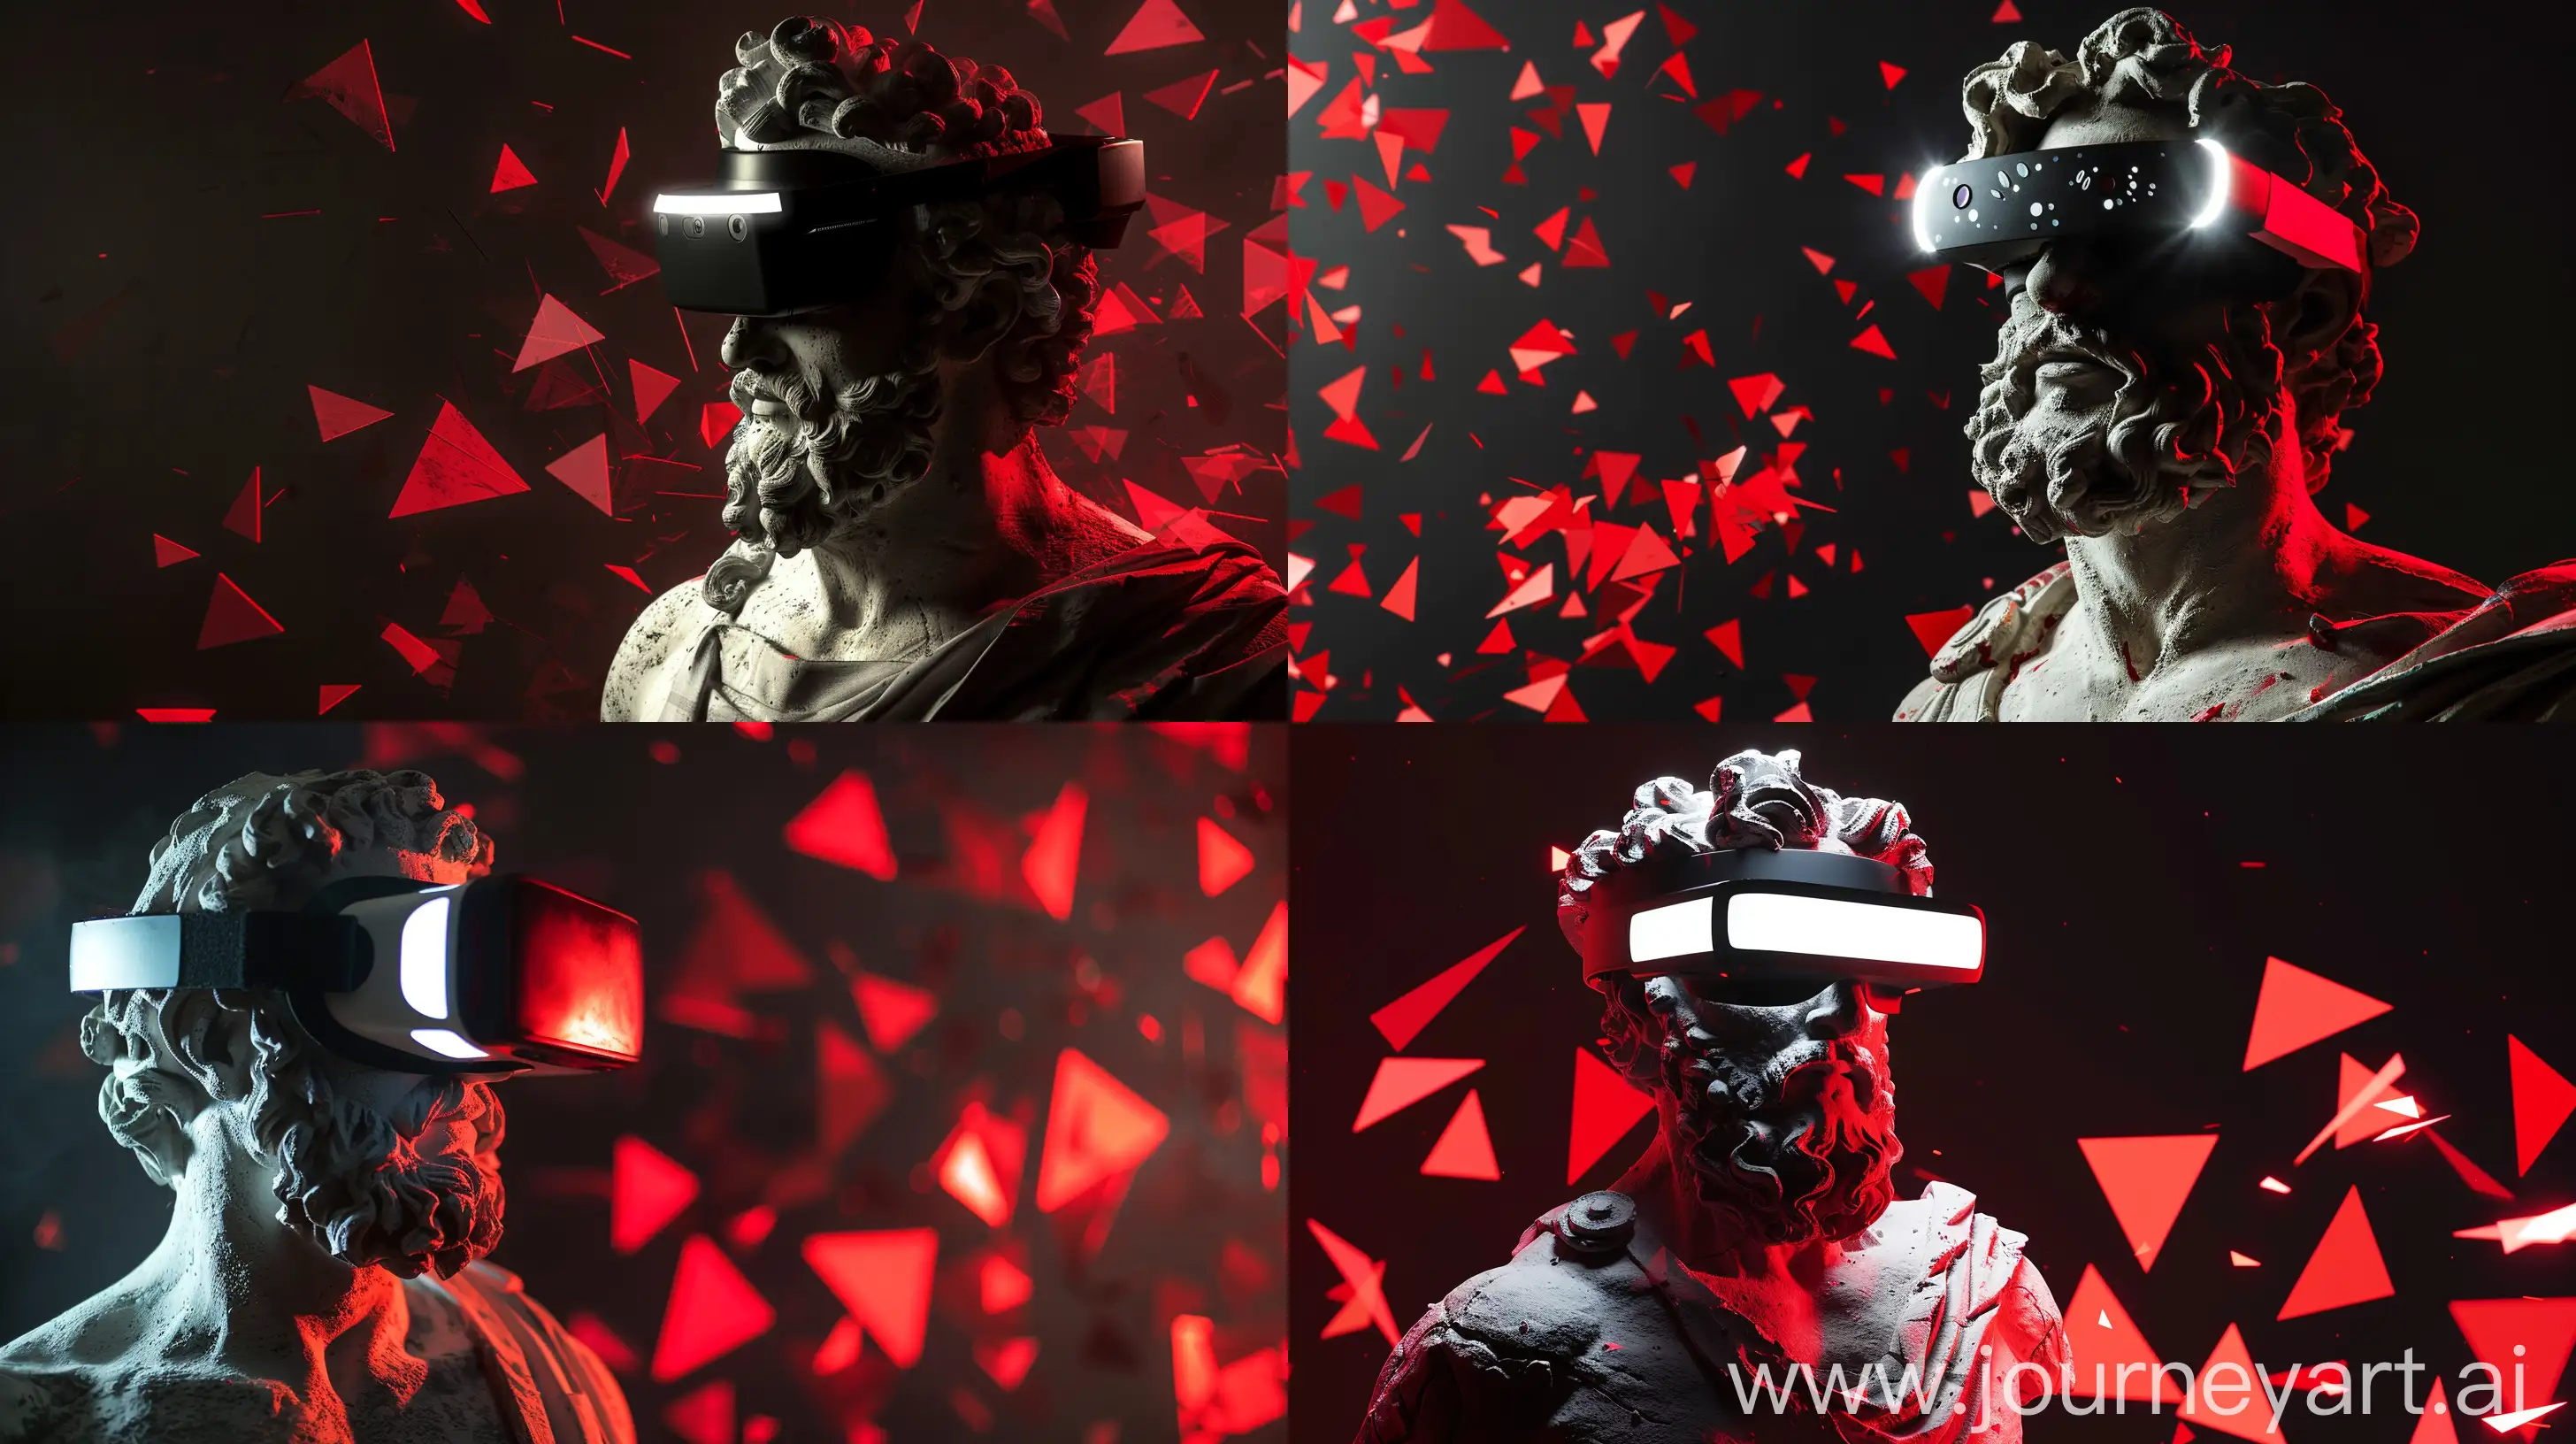 Dreamy-Pose-of-Zeus-Sculpture-with-Modern-Black-VR-Glasses-and-Red-Abstract-Patterns